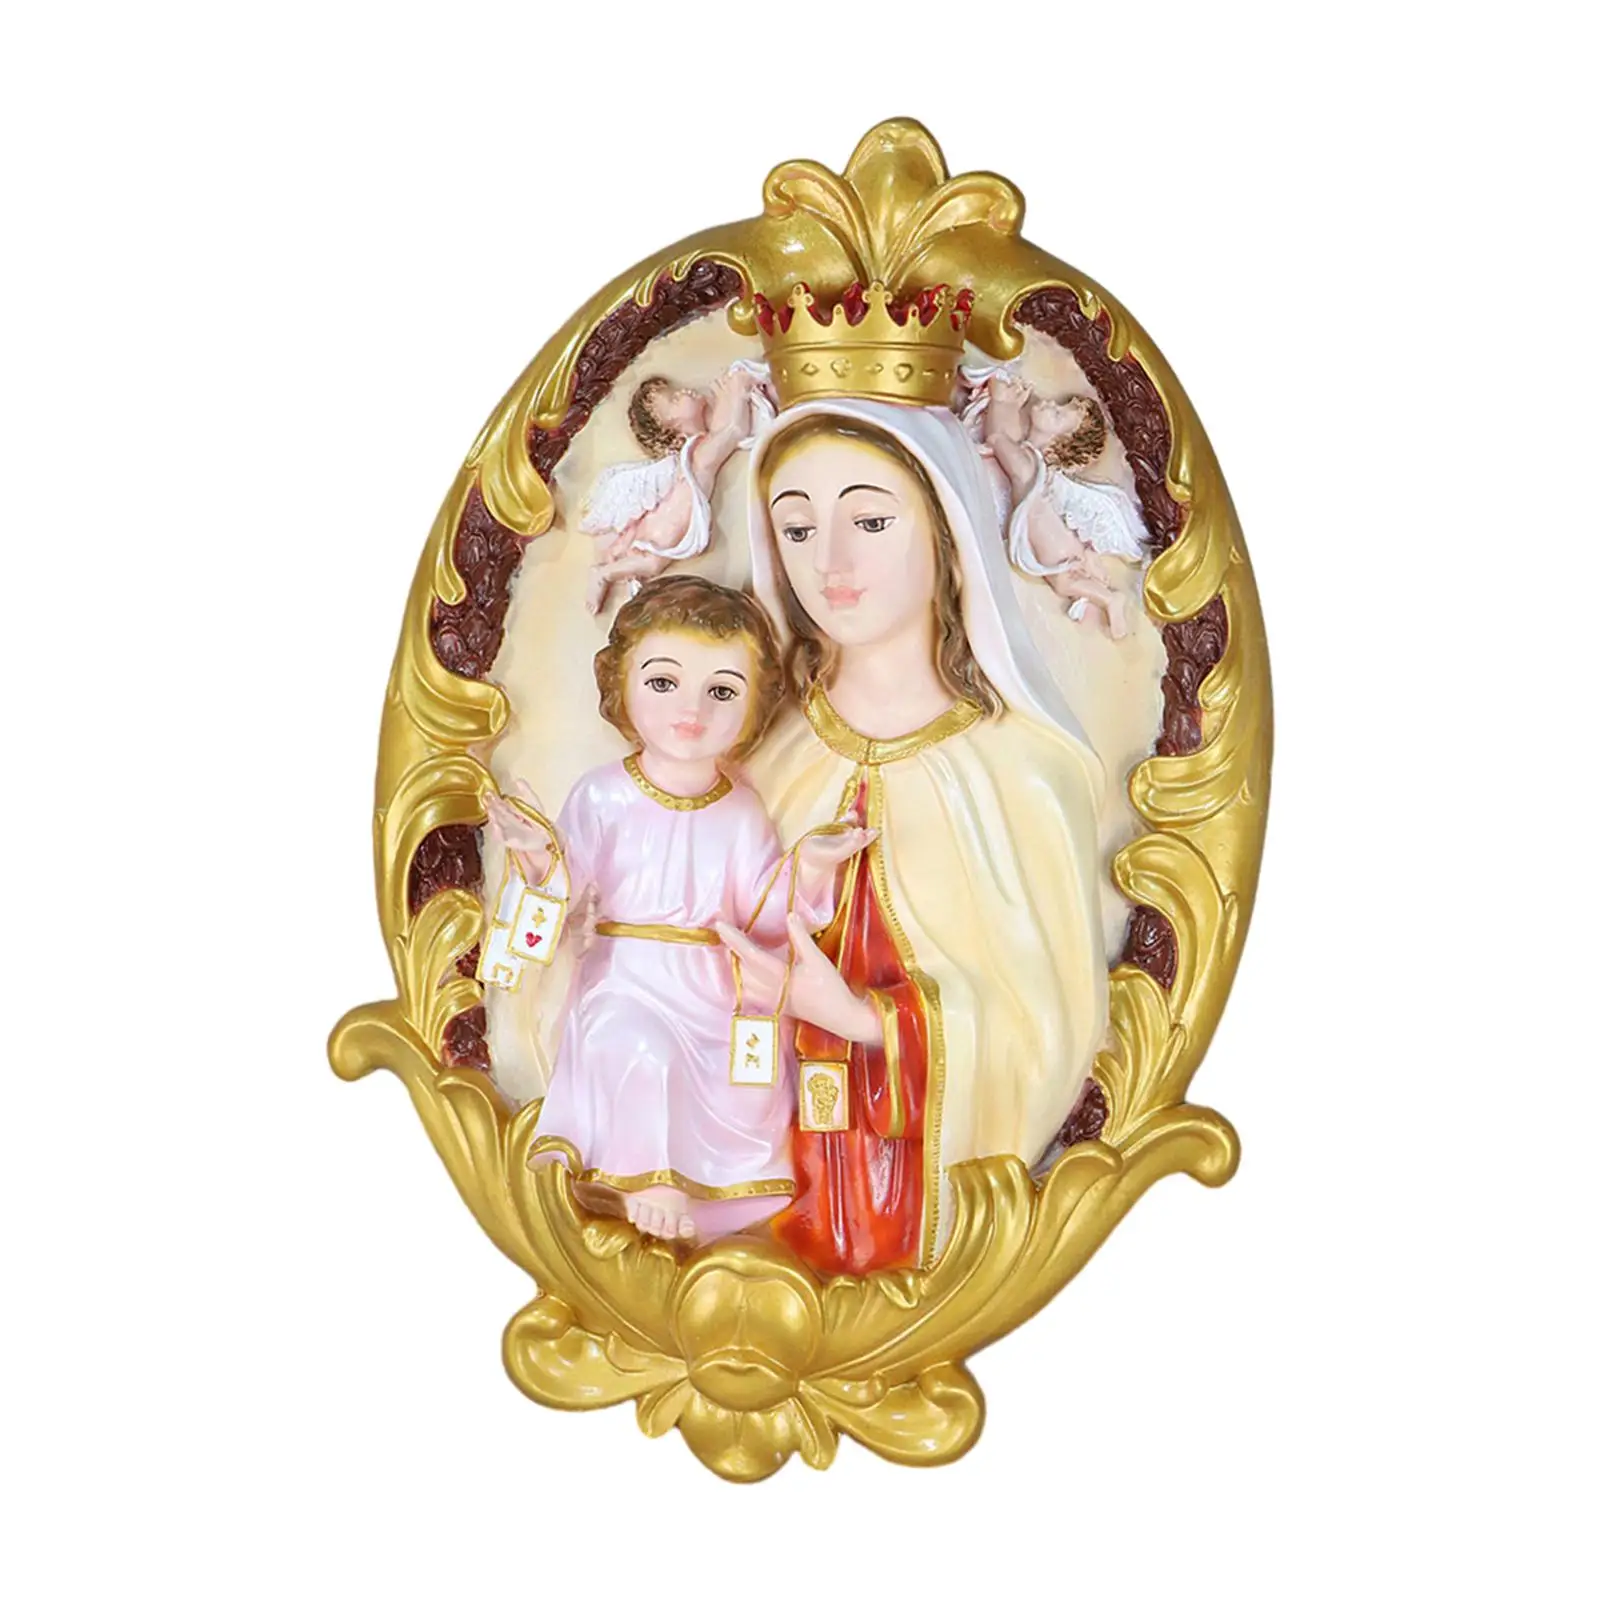 Catholic Jesus Mother Mary Sculpture Resin Decorative Crafts Xmas Present Religious Figure Statue for Wall Dining Shelf Table